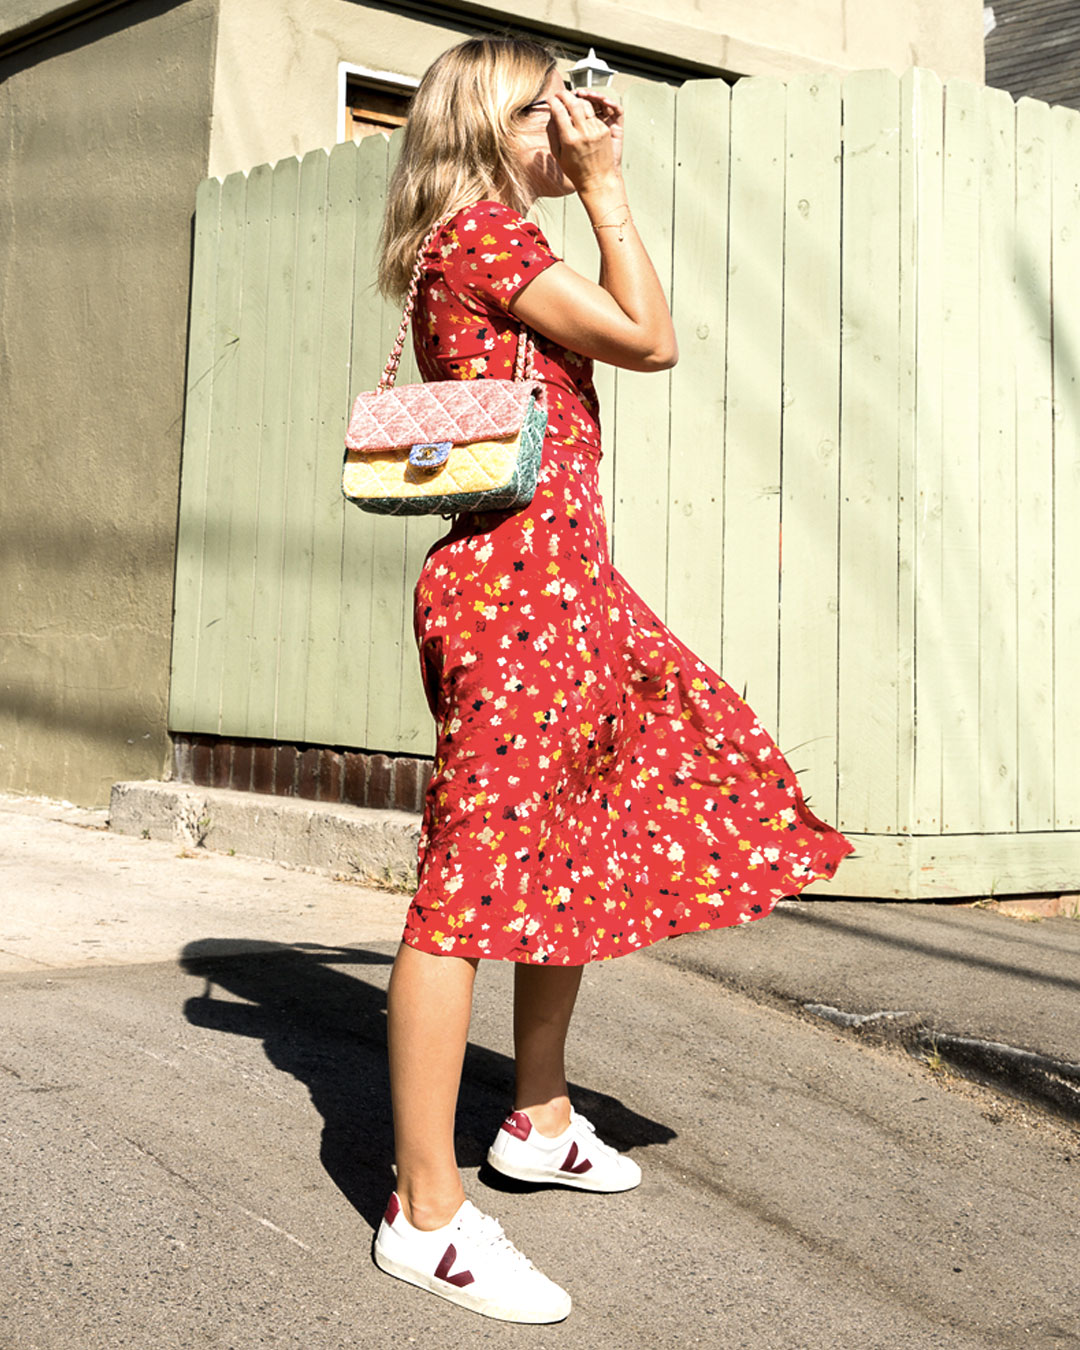 Best Classic Sneakers: Lucy Williams wears Veja Trainers and Realisation Par Summer Dress